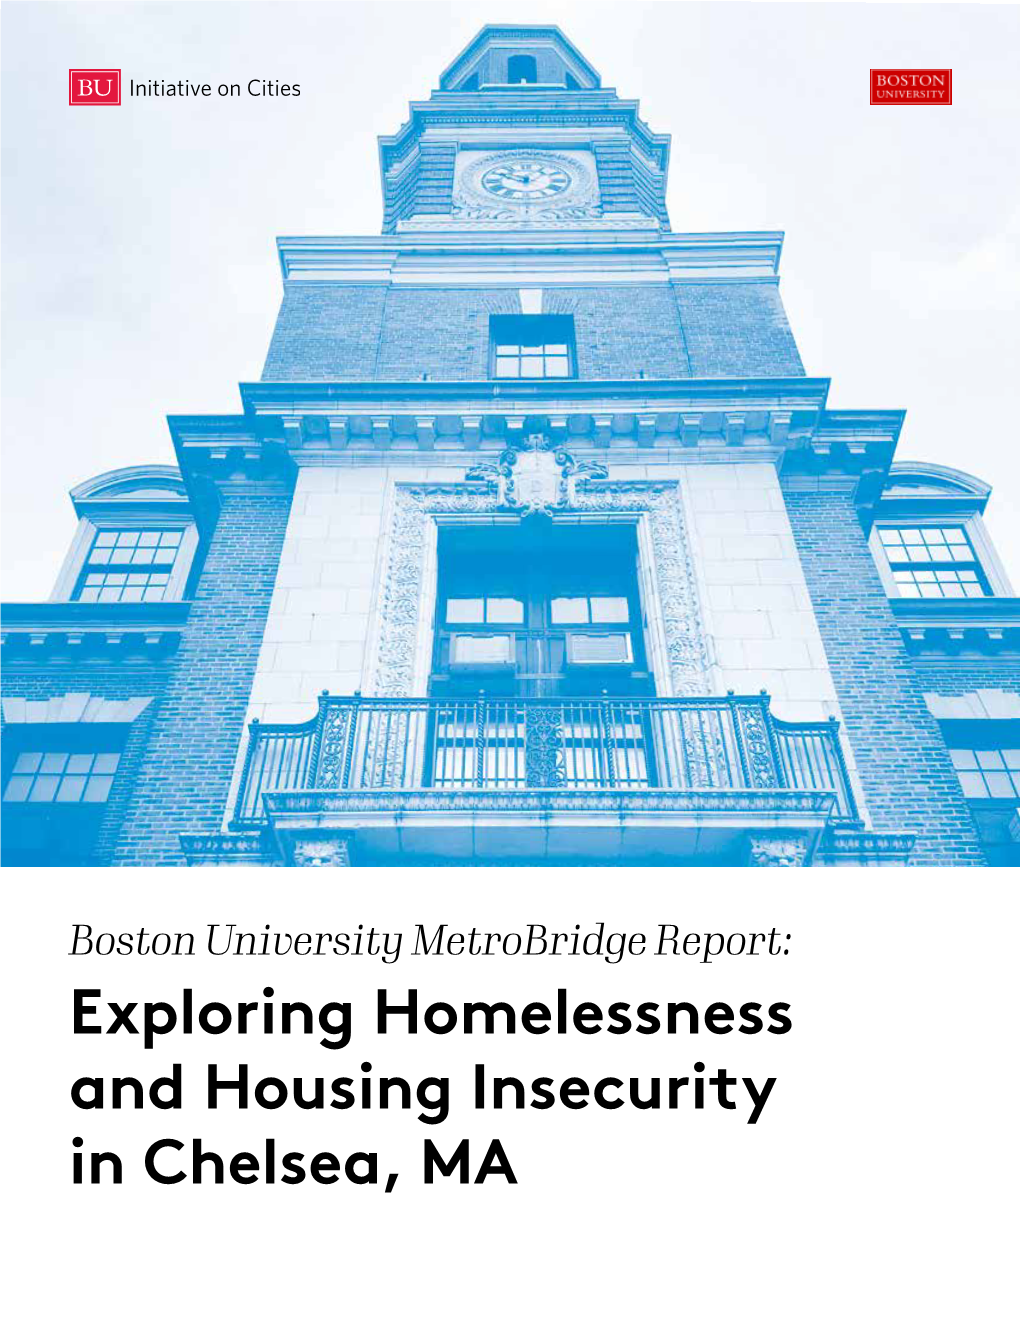 Exploring Homelessness and Housing Insecurity in Chelsea, MA